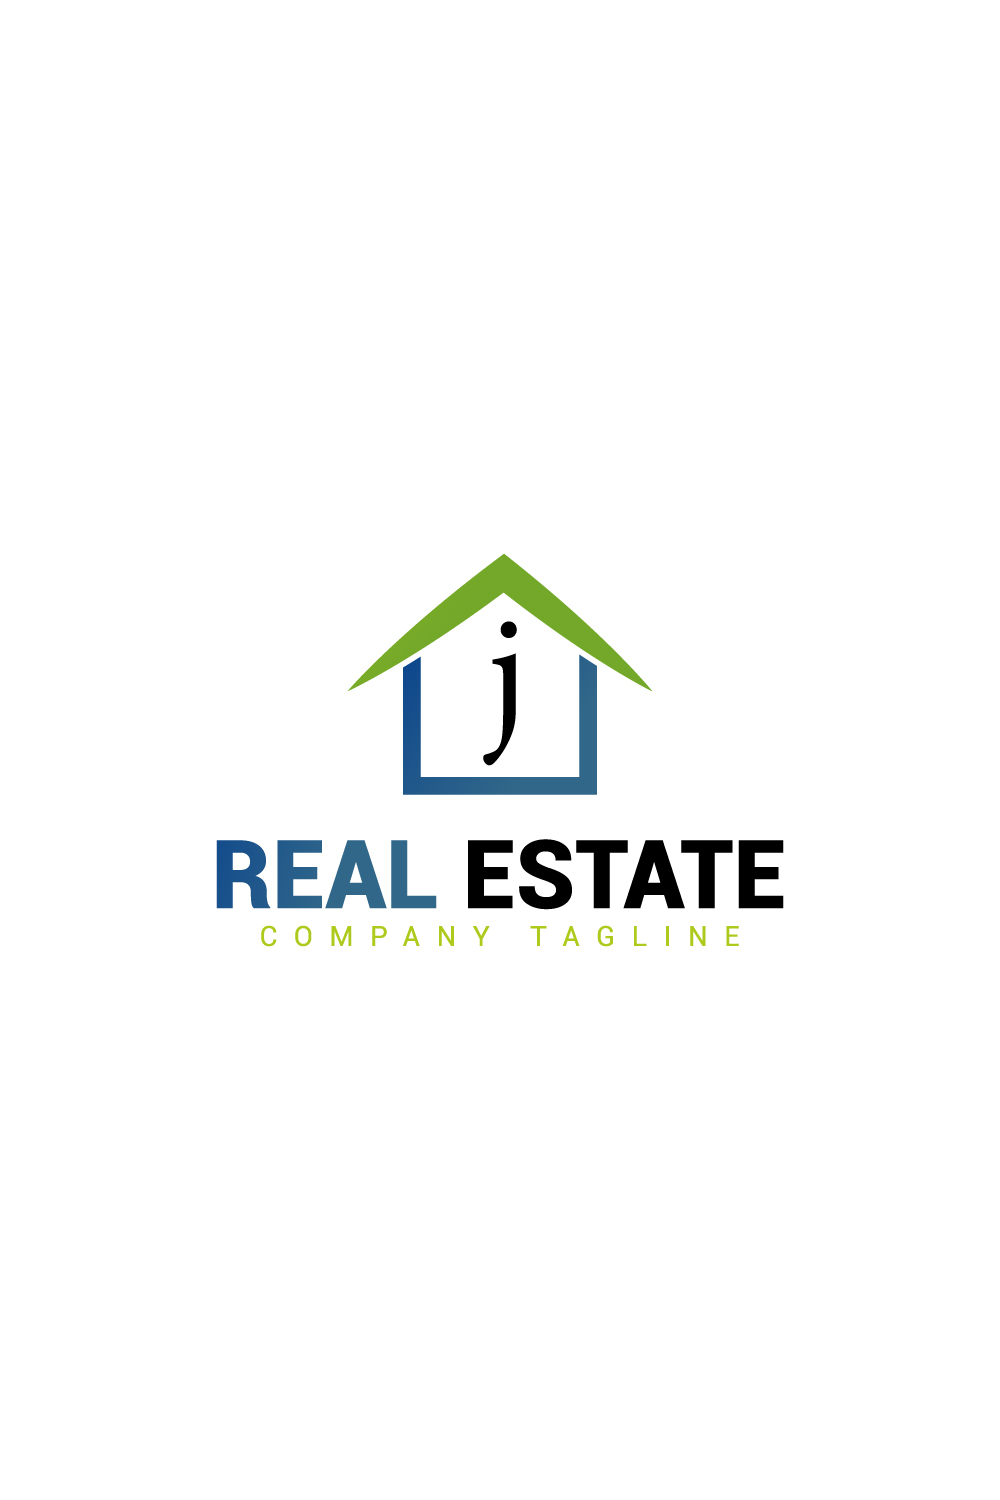 Real estate logo with green, dark blue color and J letter pinterest preview image.